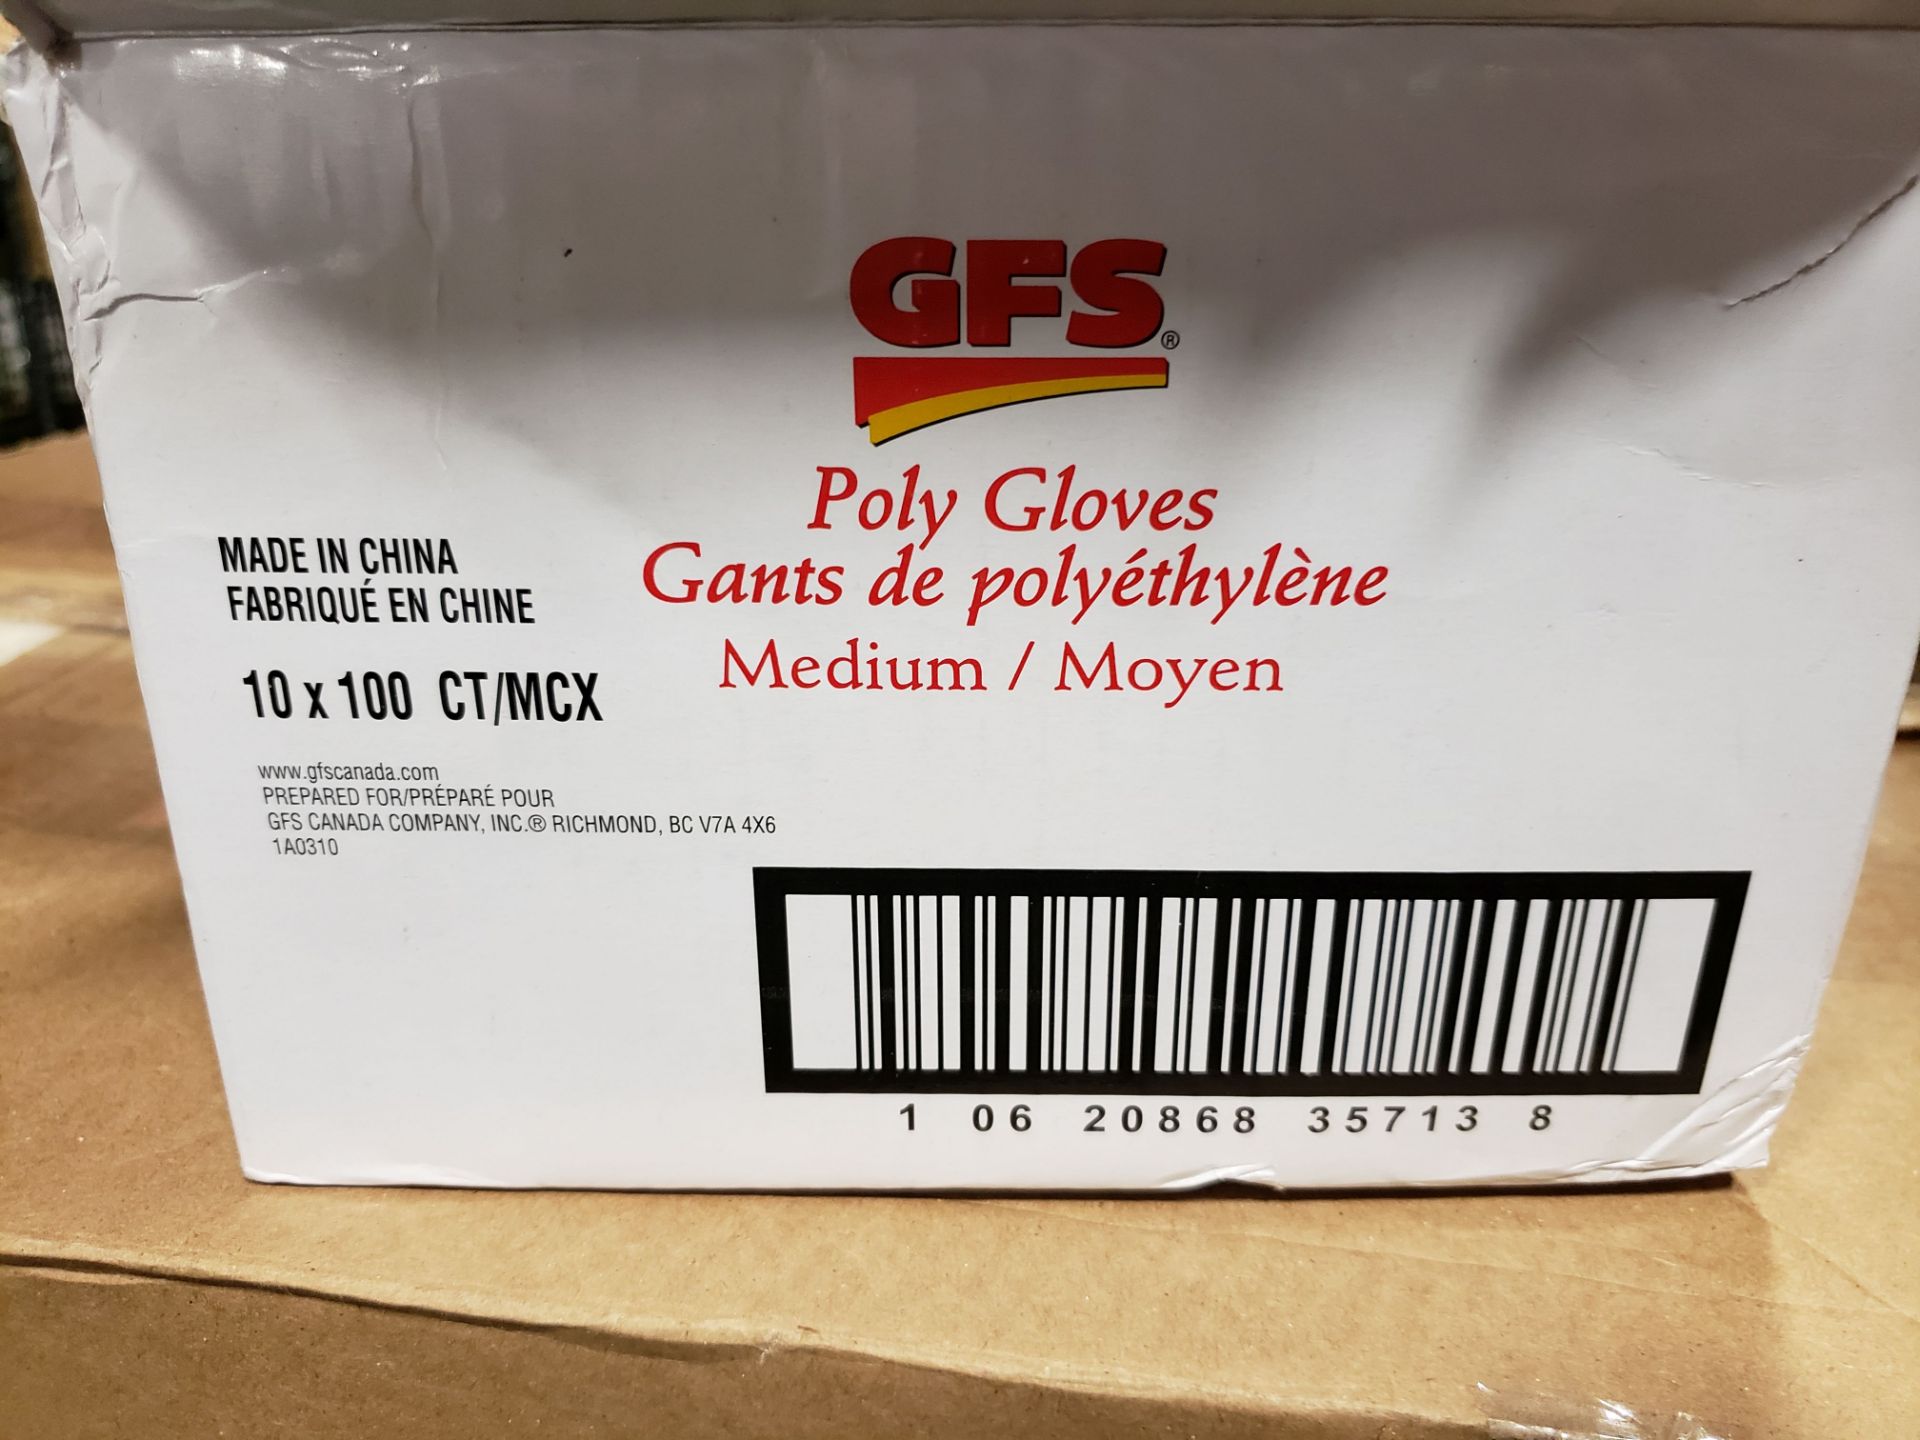 GFS Poly Gloves - "Medium" - 10 x 100 Count - Image 2 of 2